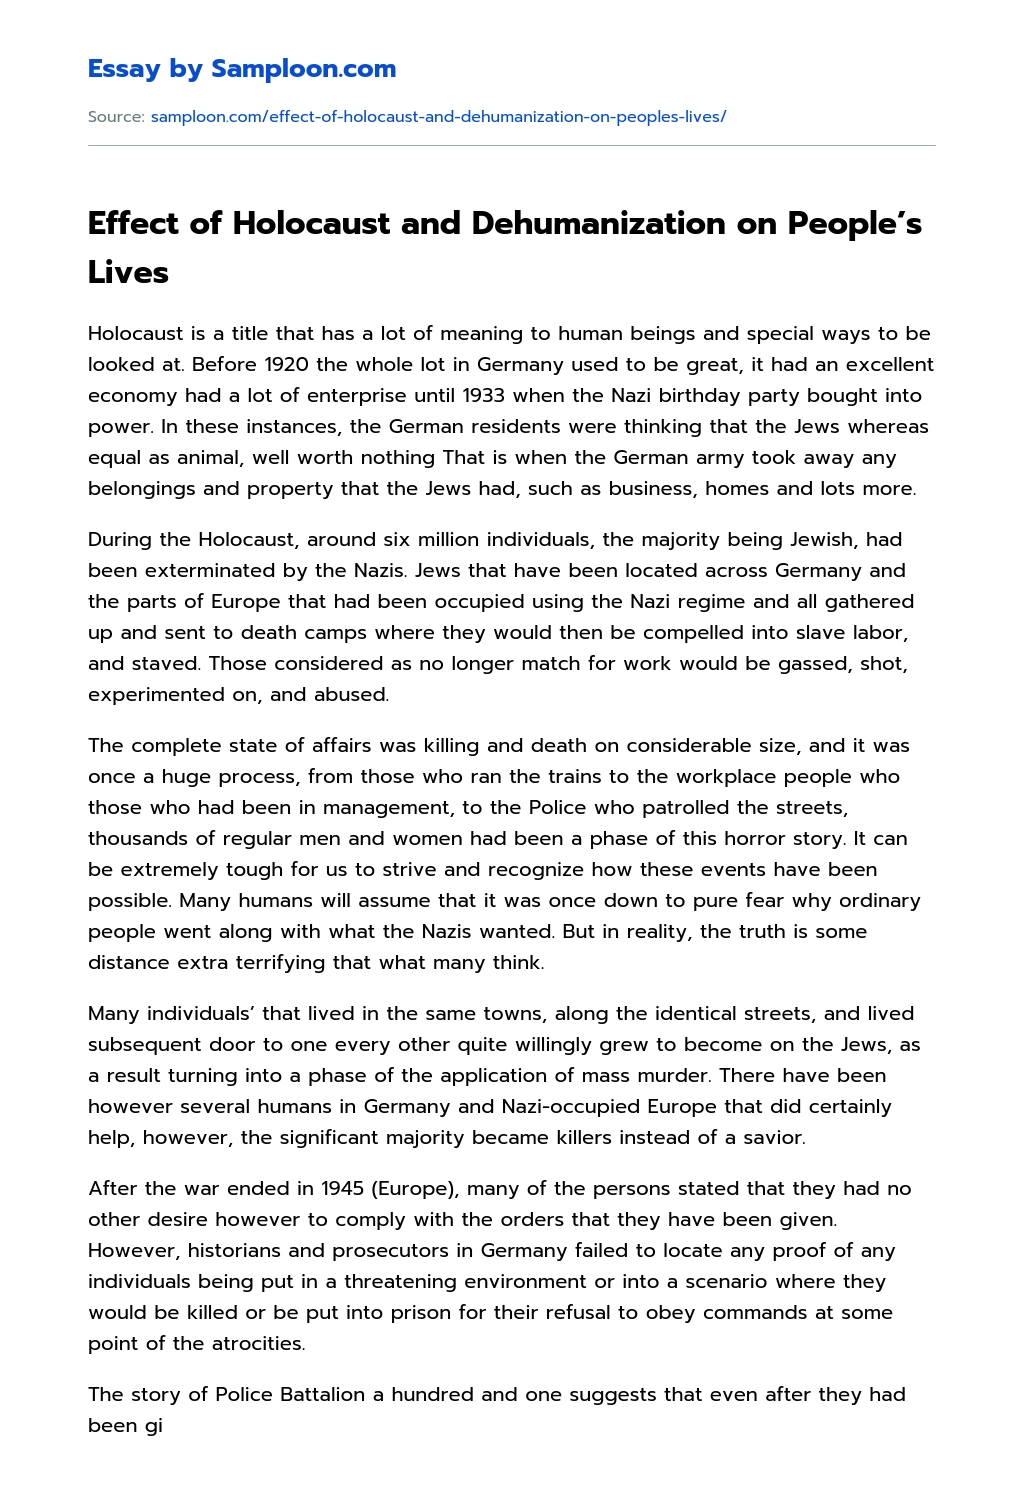 Effect of Holocaust and Dehumanization on People’s Lives essay